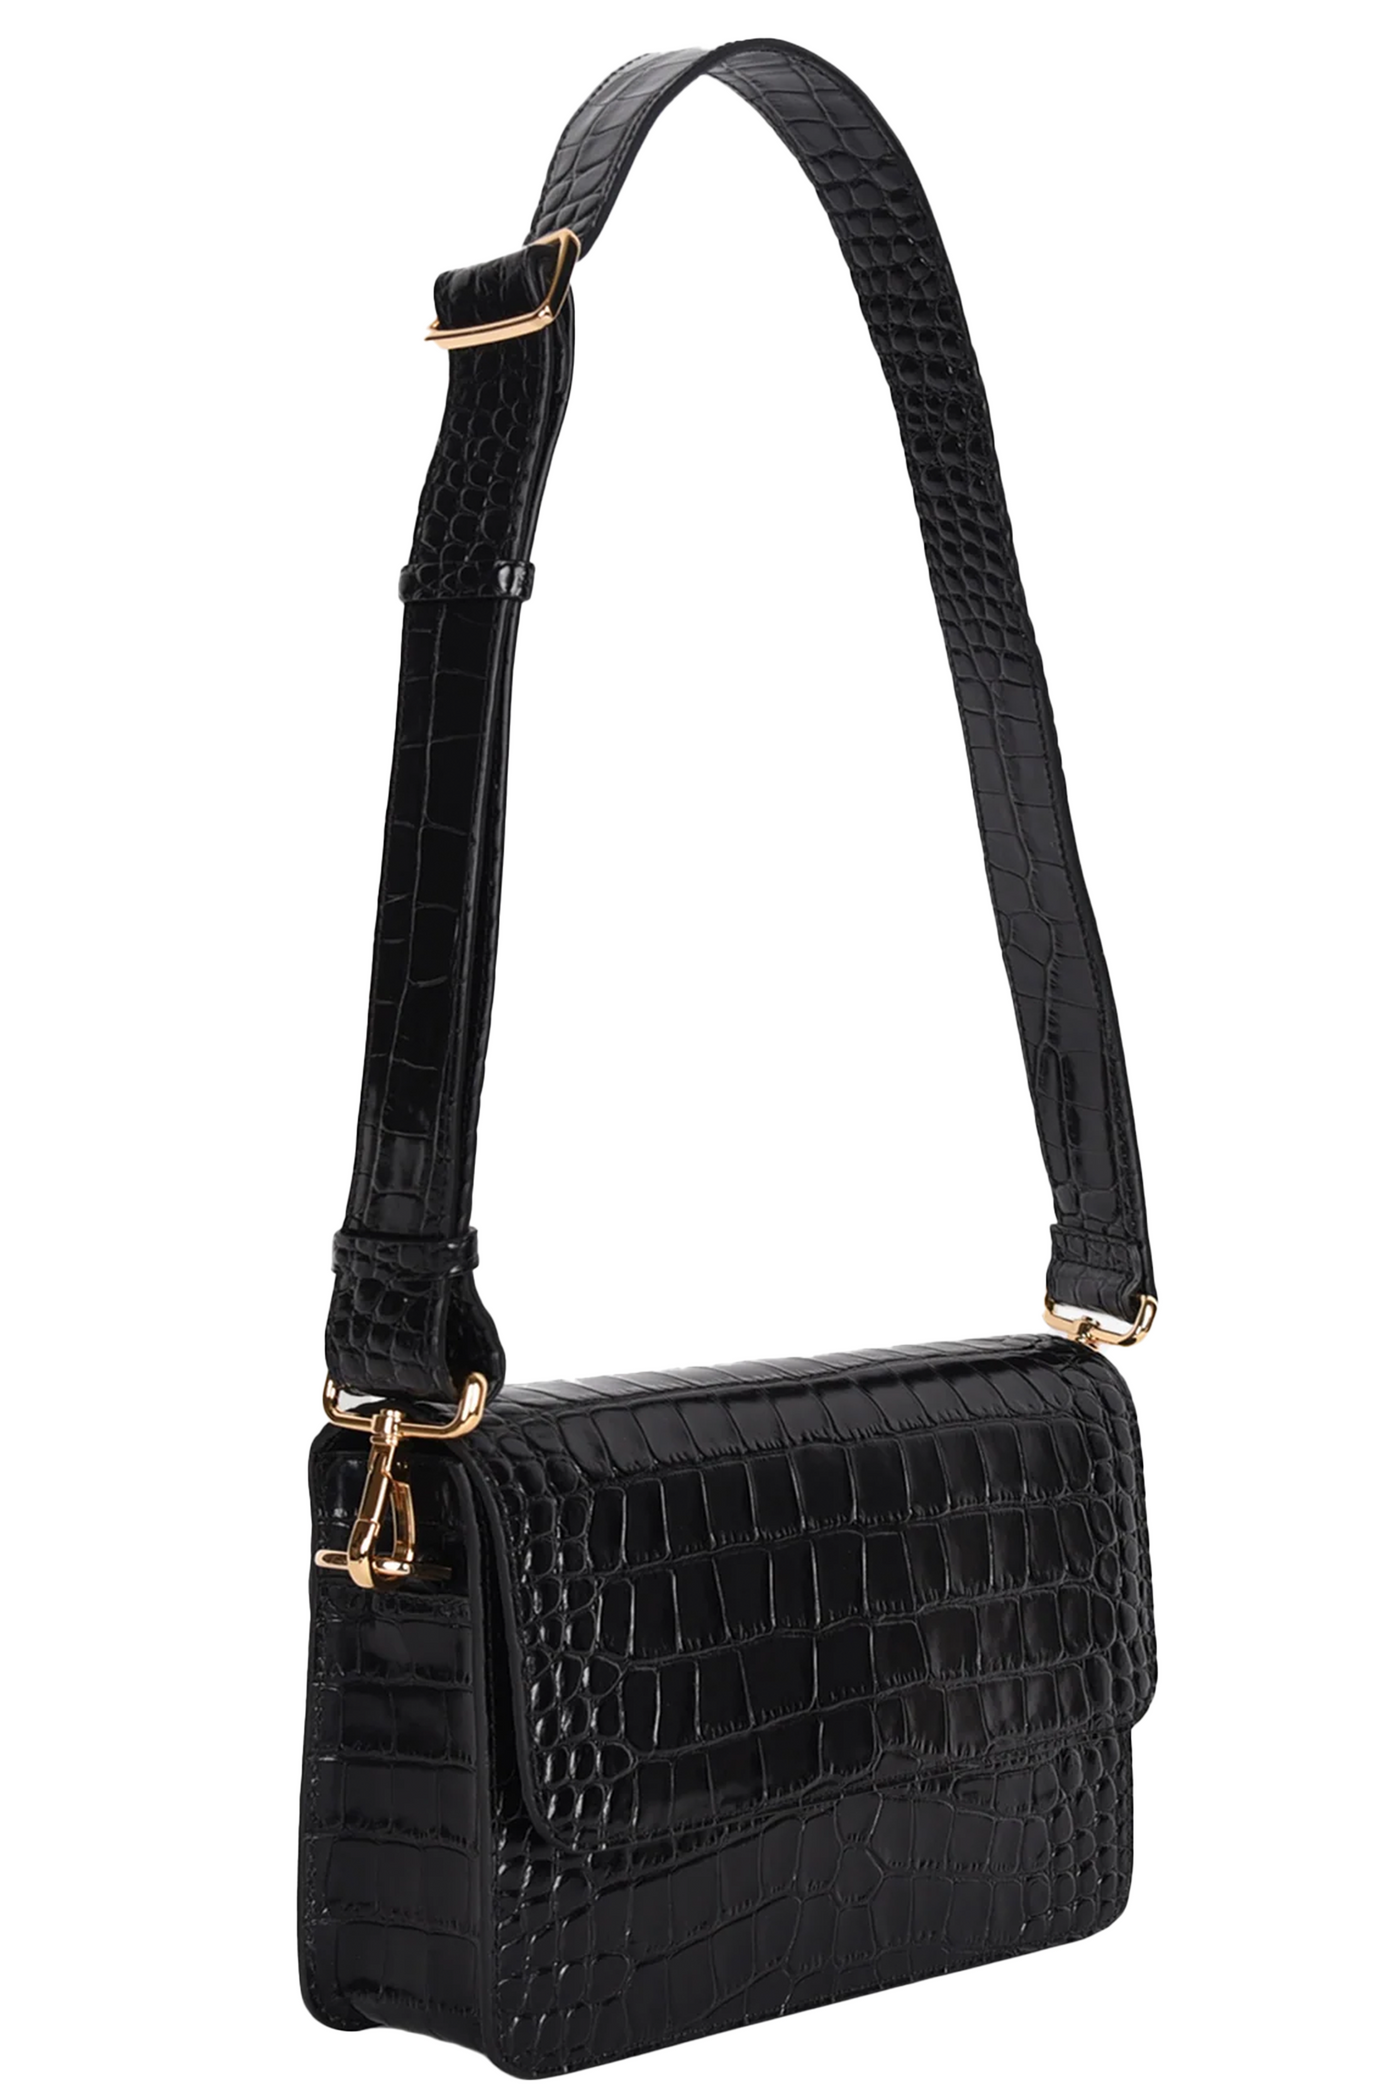 HYER GOODS: LUXE CUBE BAG WITH REMOVABLE SHOULDER STRAP IN BLACK